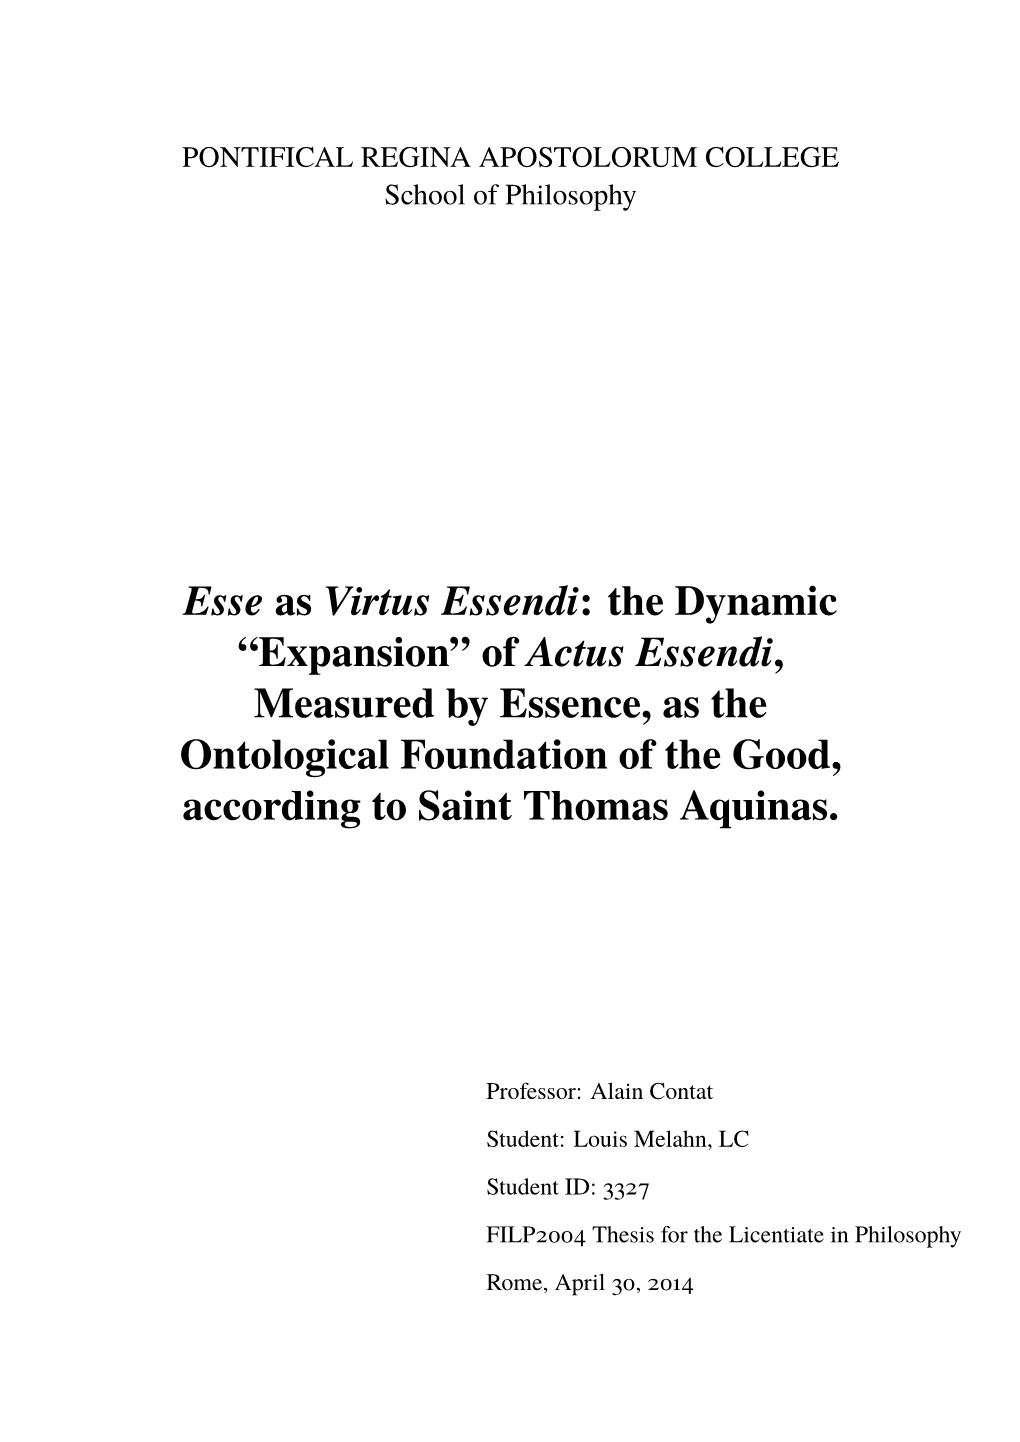 Esse As Virtus Essendi: the Dynamic “Expansion” of Actus Essendi, Measured by Essence, As the Ontological Foundation of the Good, According to Saint Thomas Aquinas